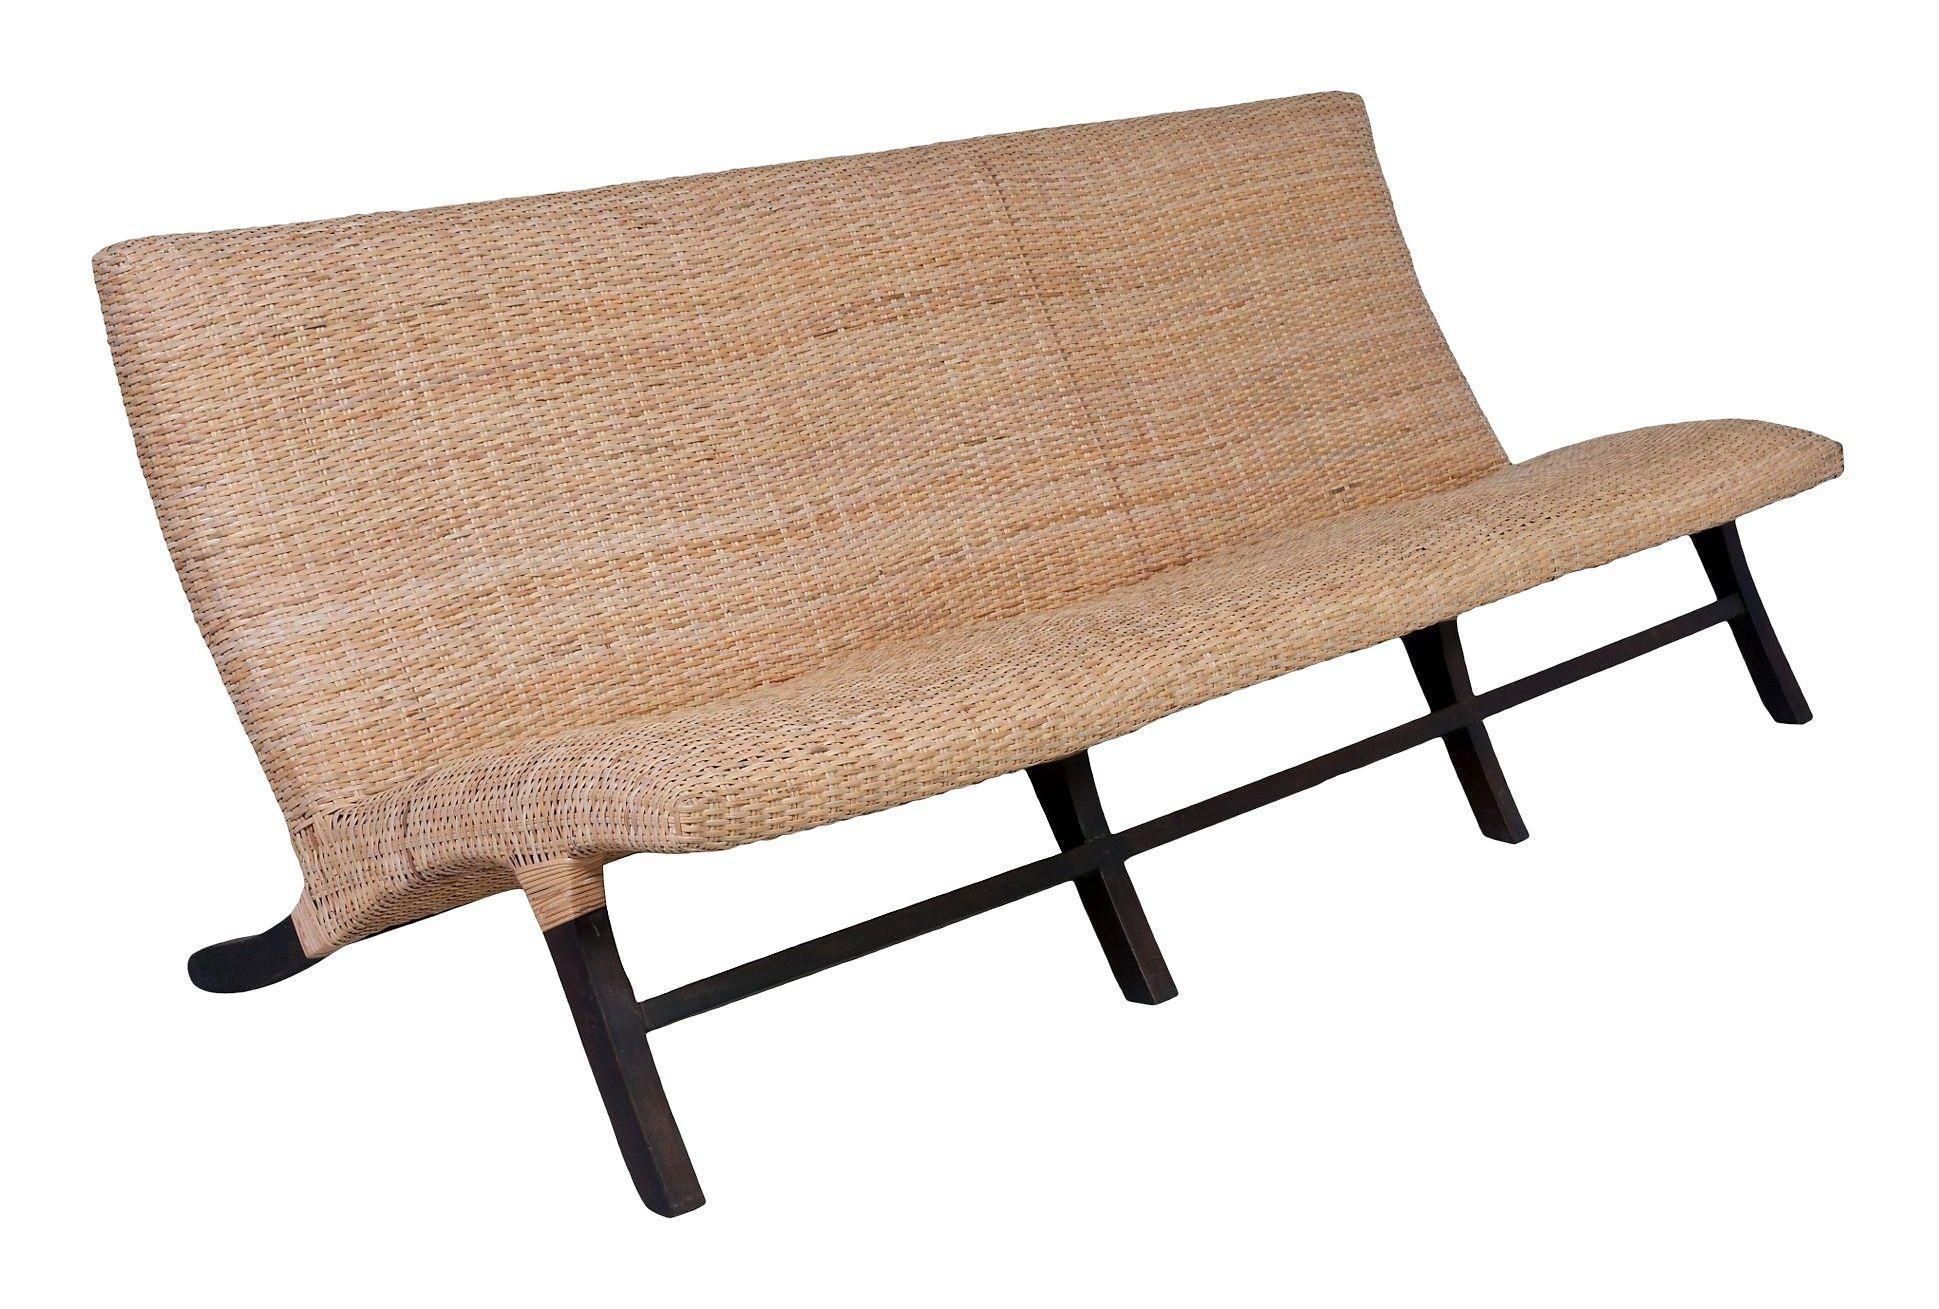 Balinese Rattan Light Tan Armless Sofa On Chairish Pertaining To Black And Tan Rattan Console Tables (Photo 19 of 20)